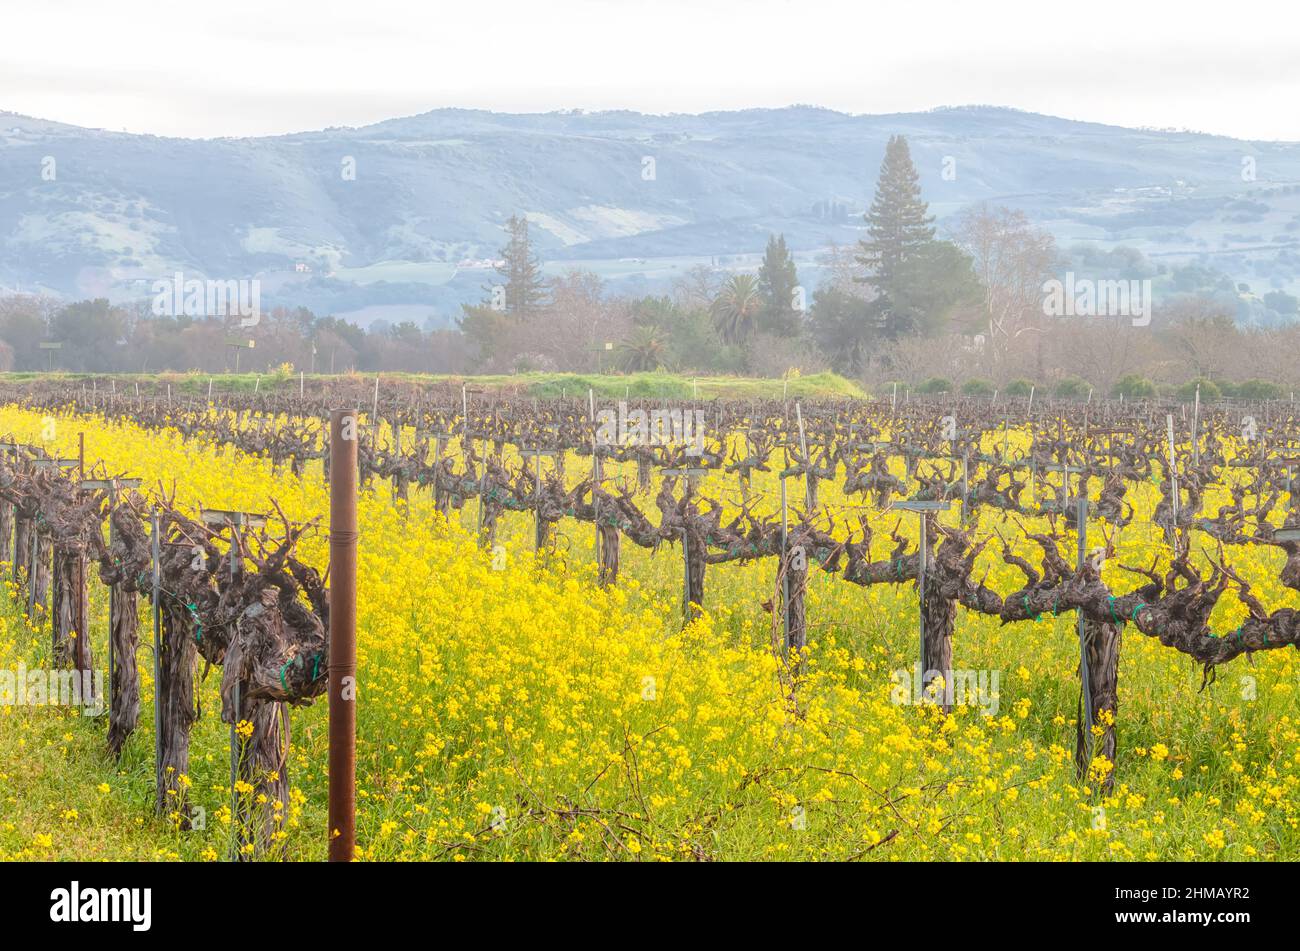 Light fog cover the Napa Valley in late winter with field mustard wildflowers blooming among the grapevines, Napa, California, USA. Stock Photo